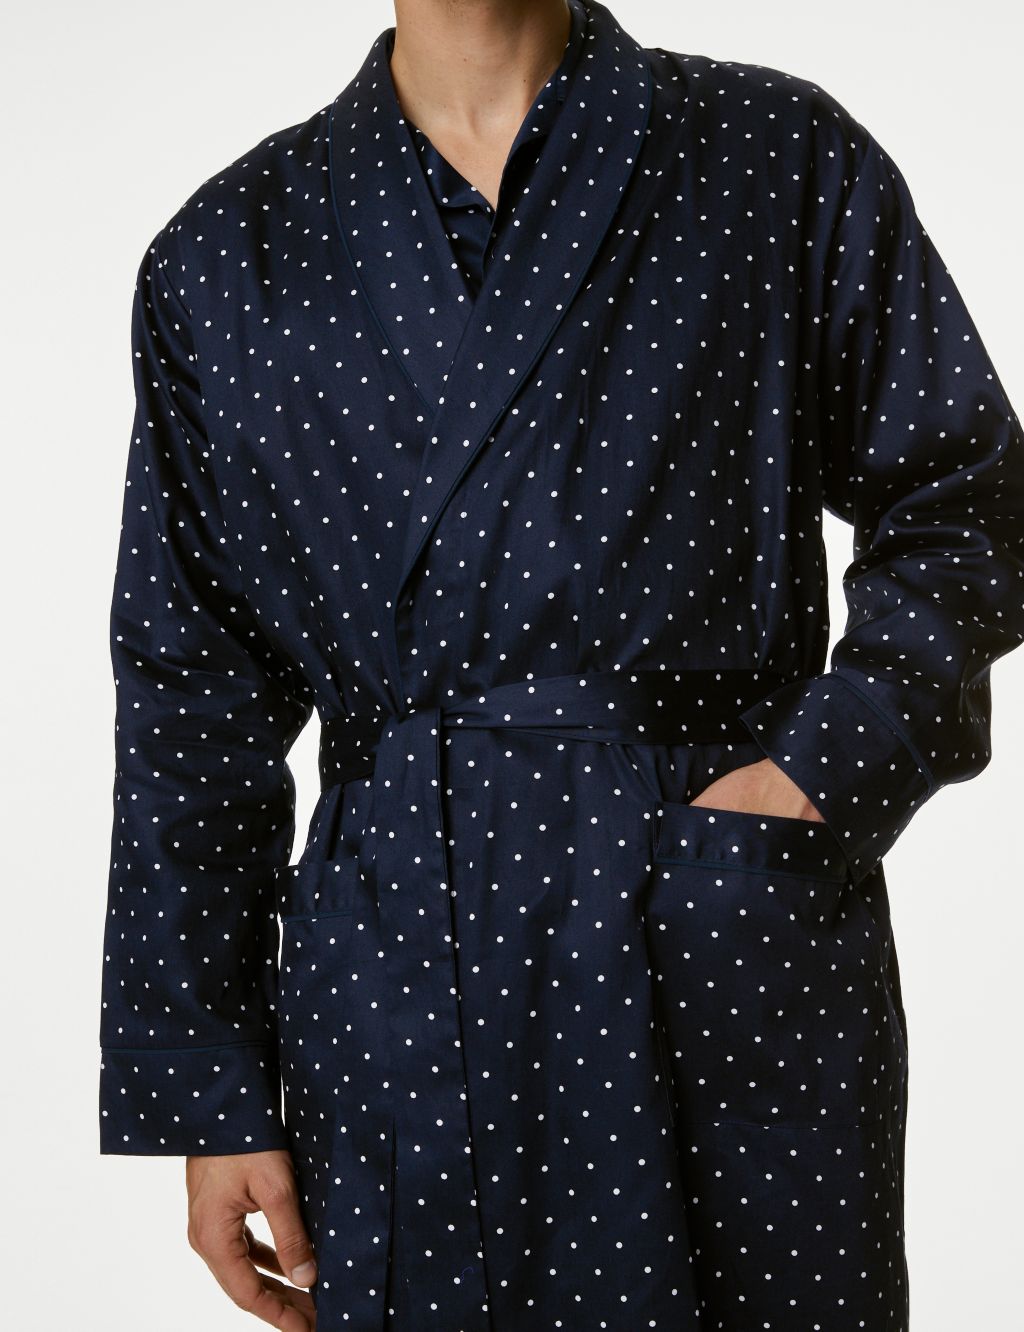 Pure Cotton Polka Dot Dressing Gown image 3